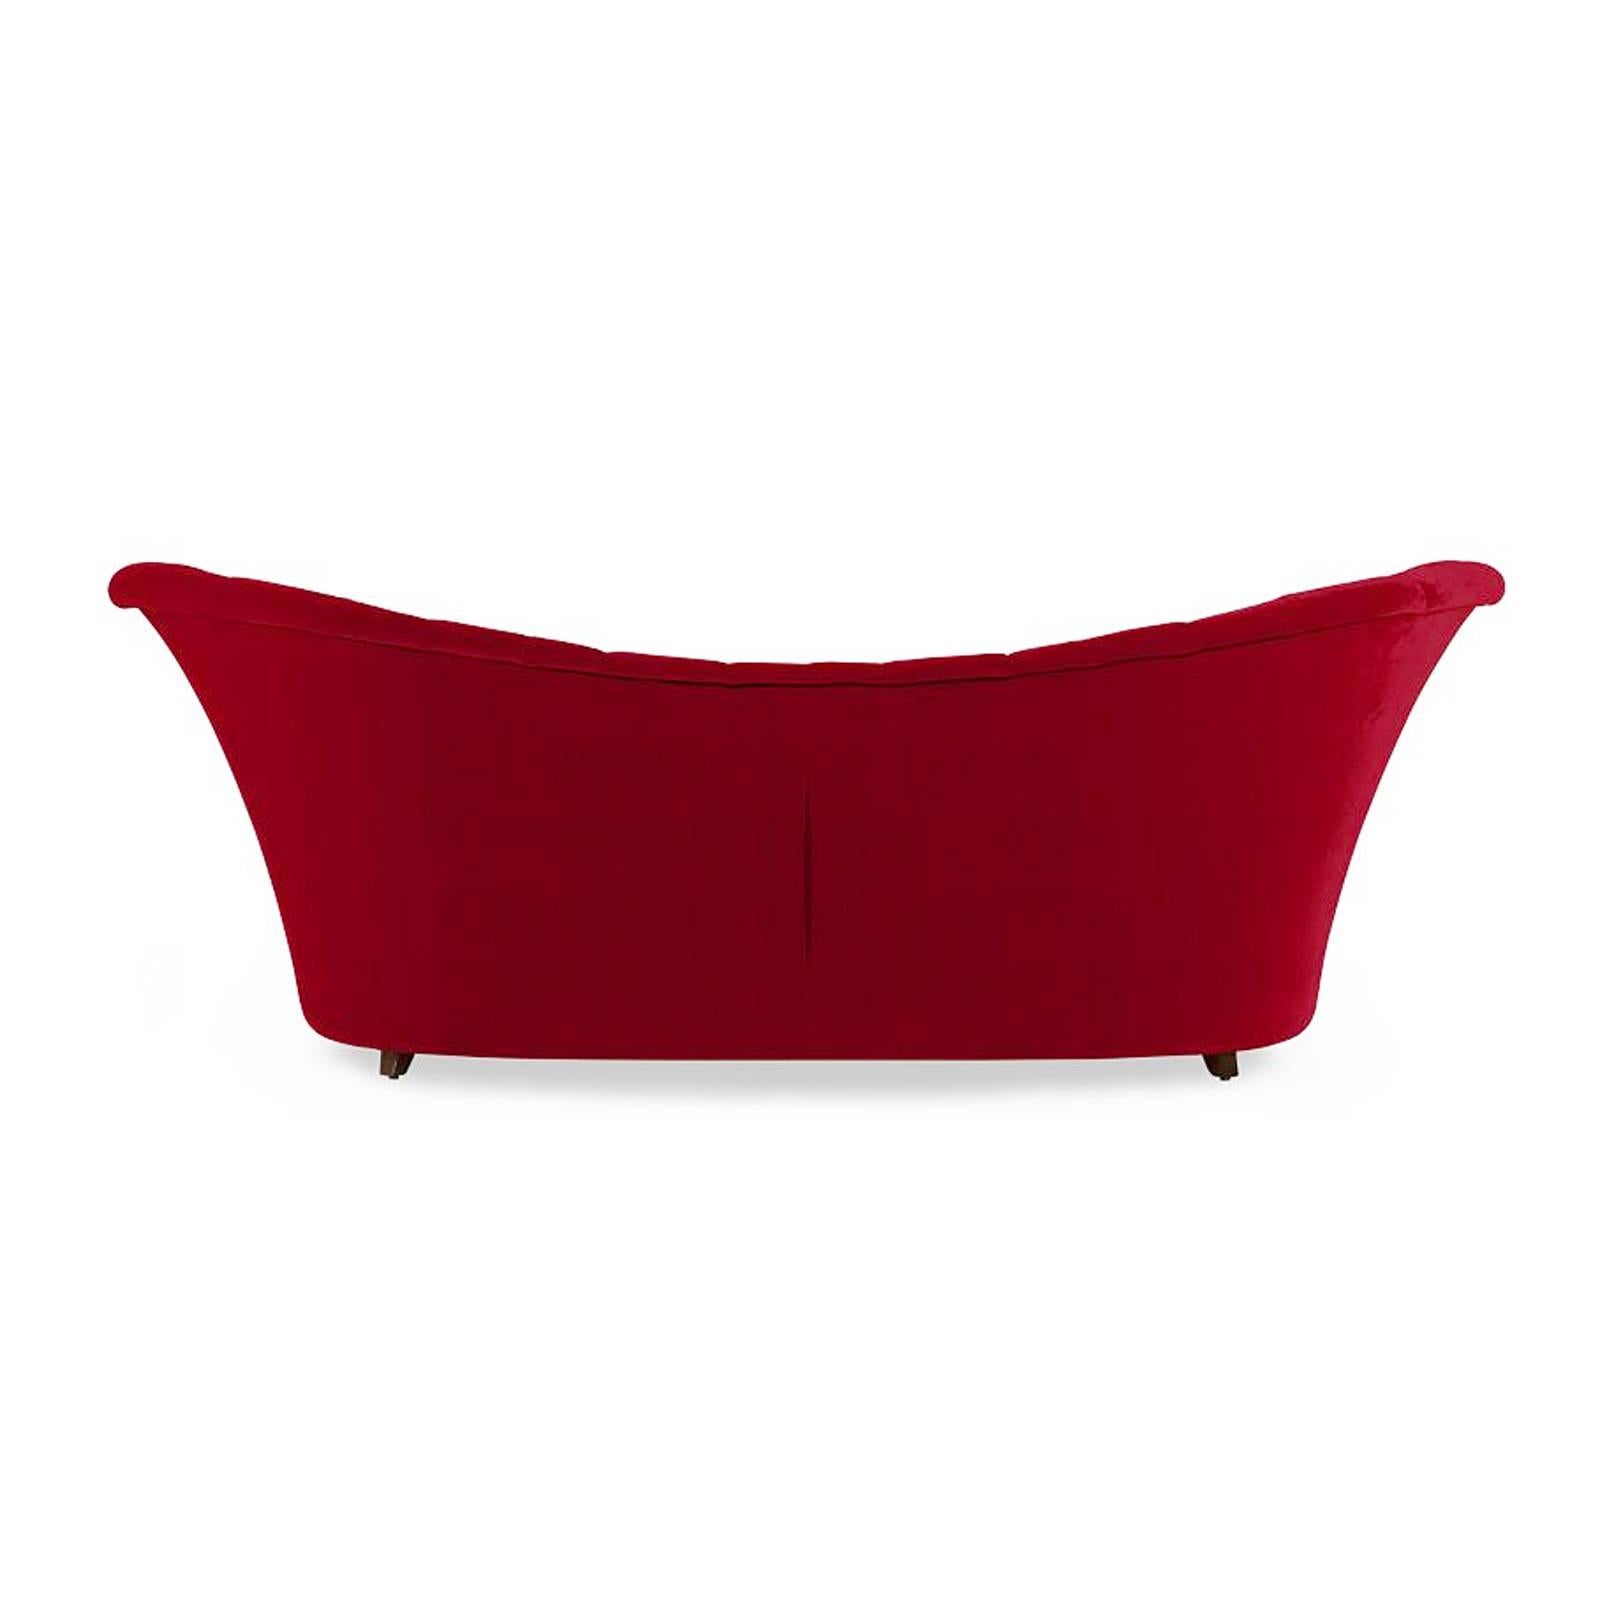 Sofa butterfly large made with solid mahogany wood structure.
Upholstered with high quality red velvet fabric or customer fabric
on request. Also available with different structure finishes and
different fabric finishes, on request. Also